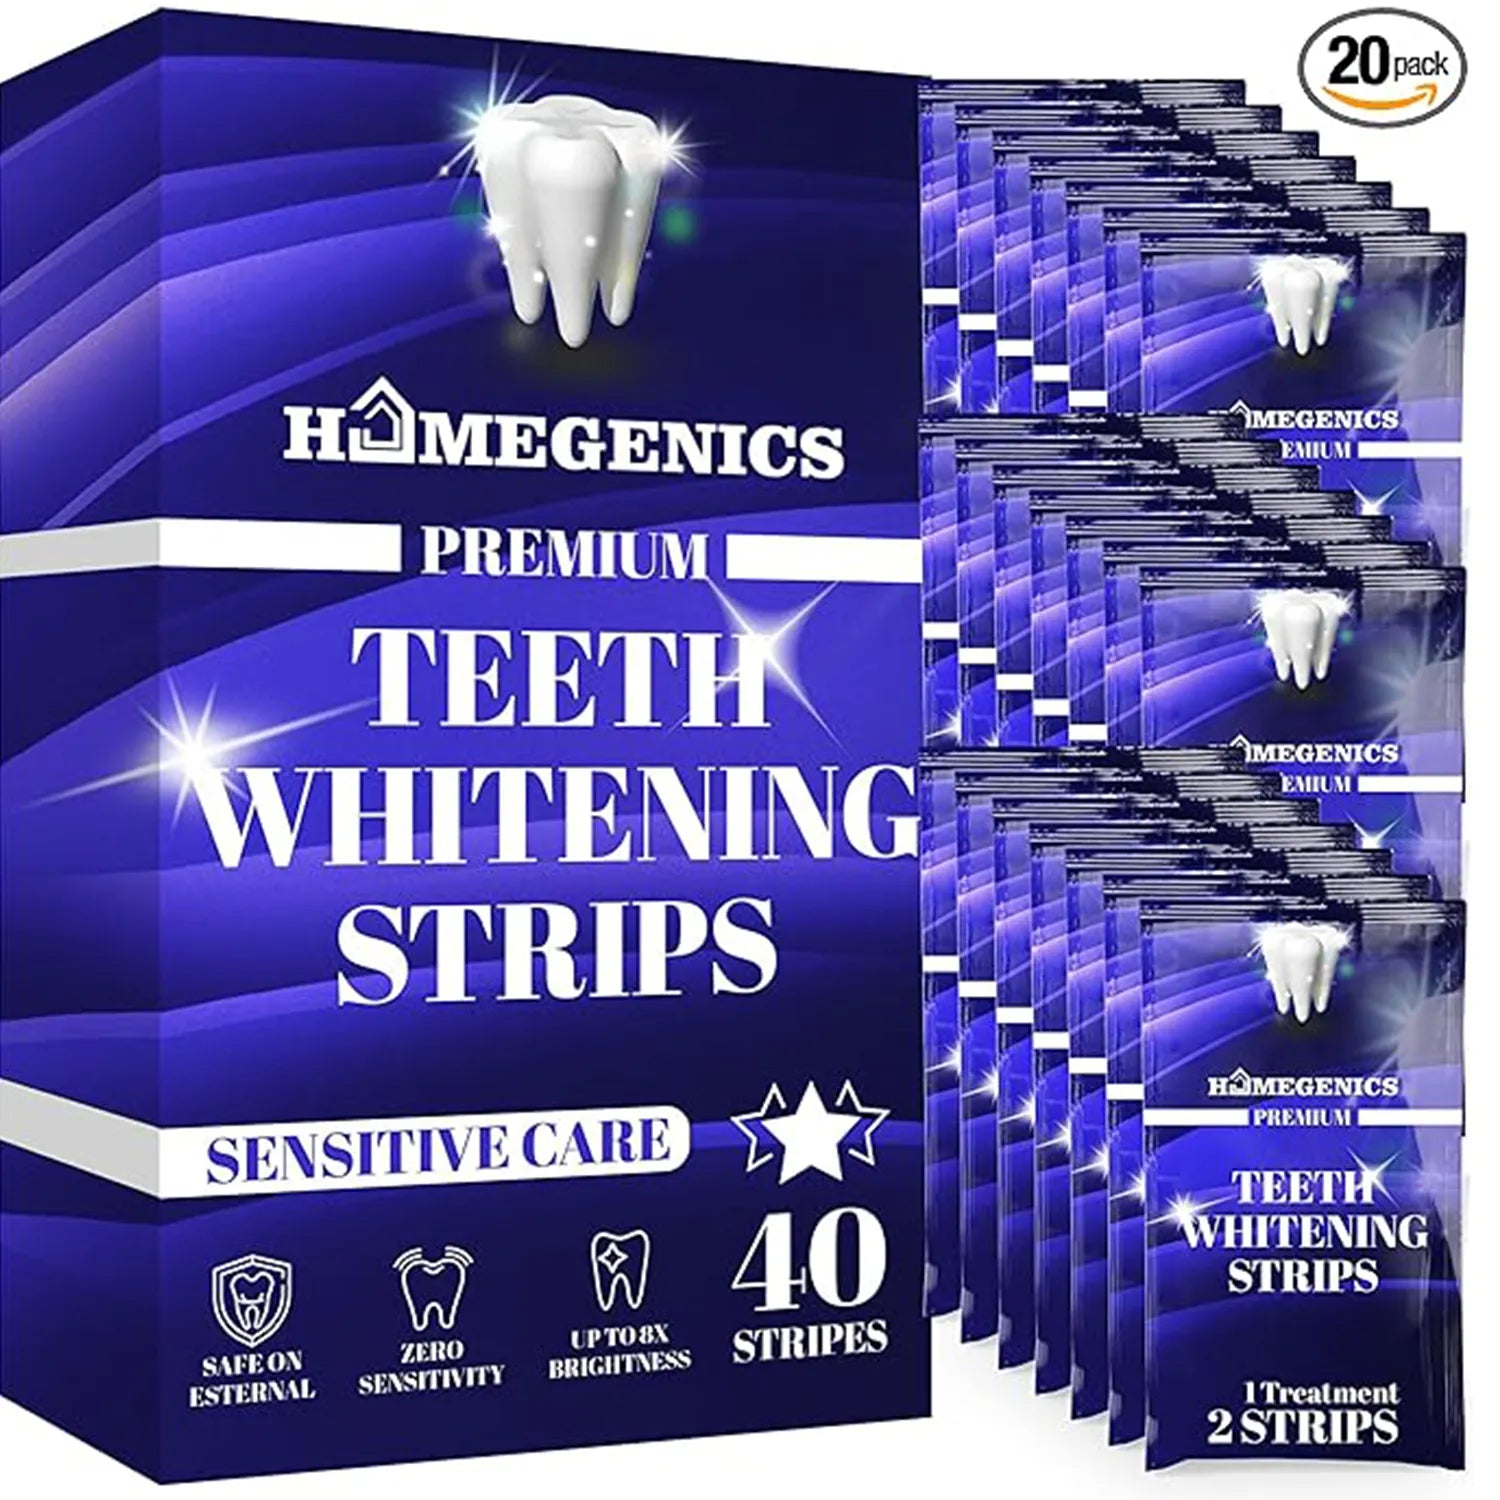 HomeGenics Teeth Whitening Strips - 20 Sessions, Peroxide-Free Kit with Free Mouth Opener